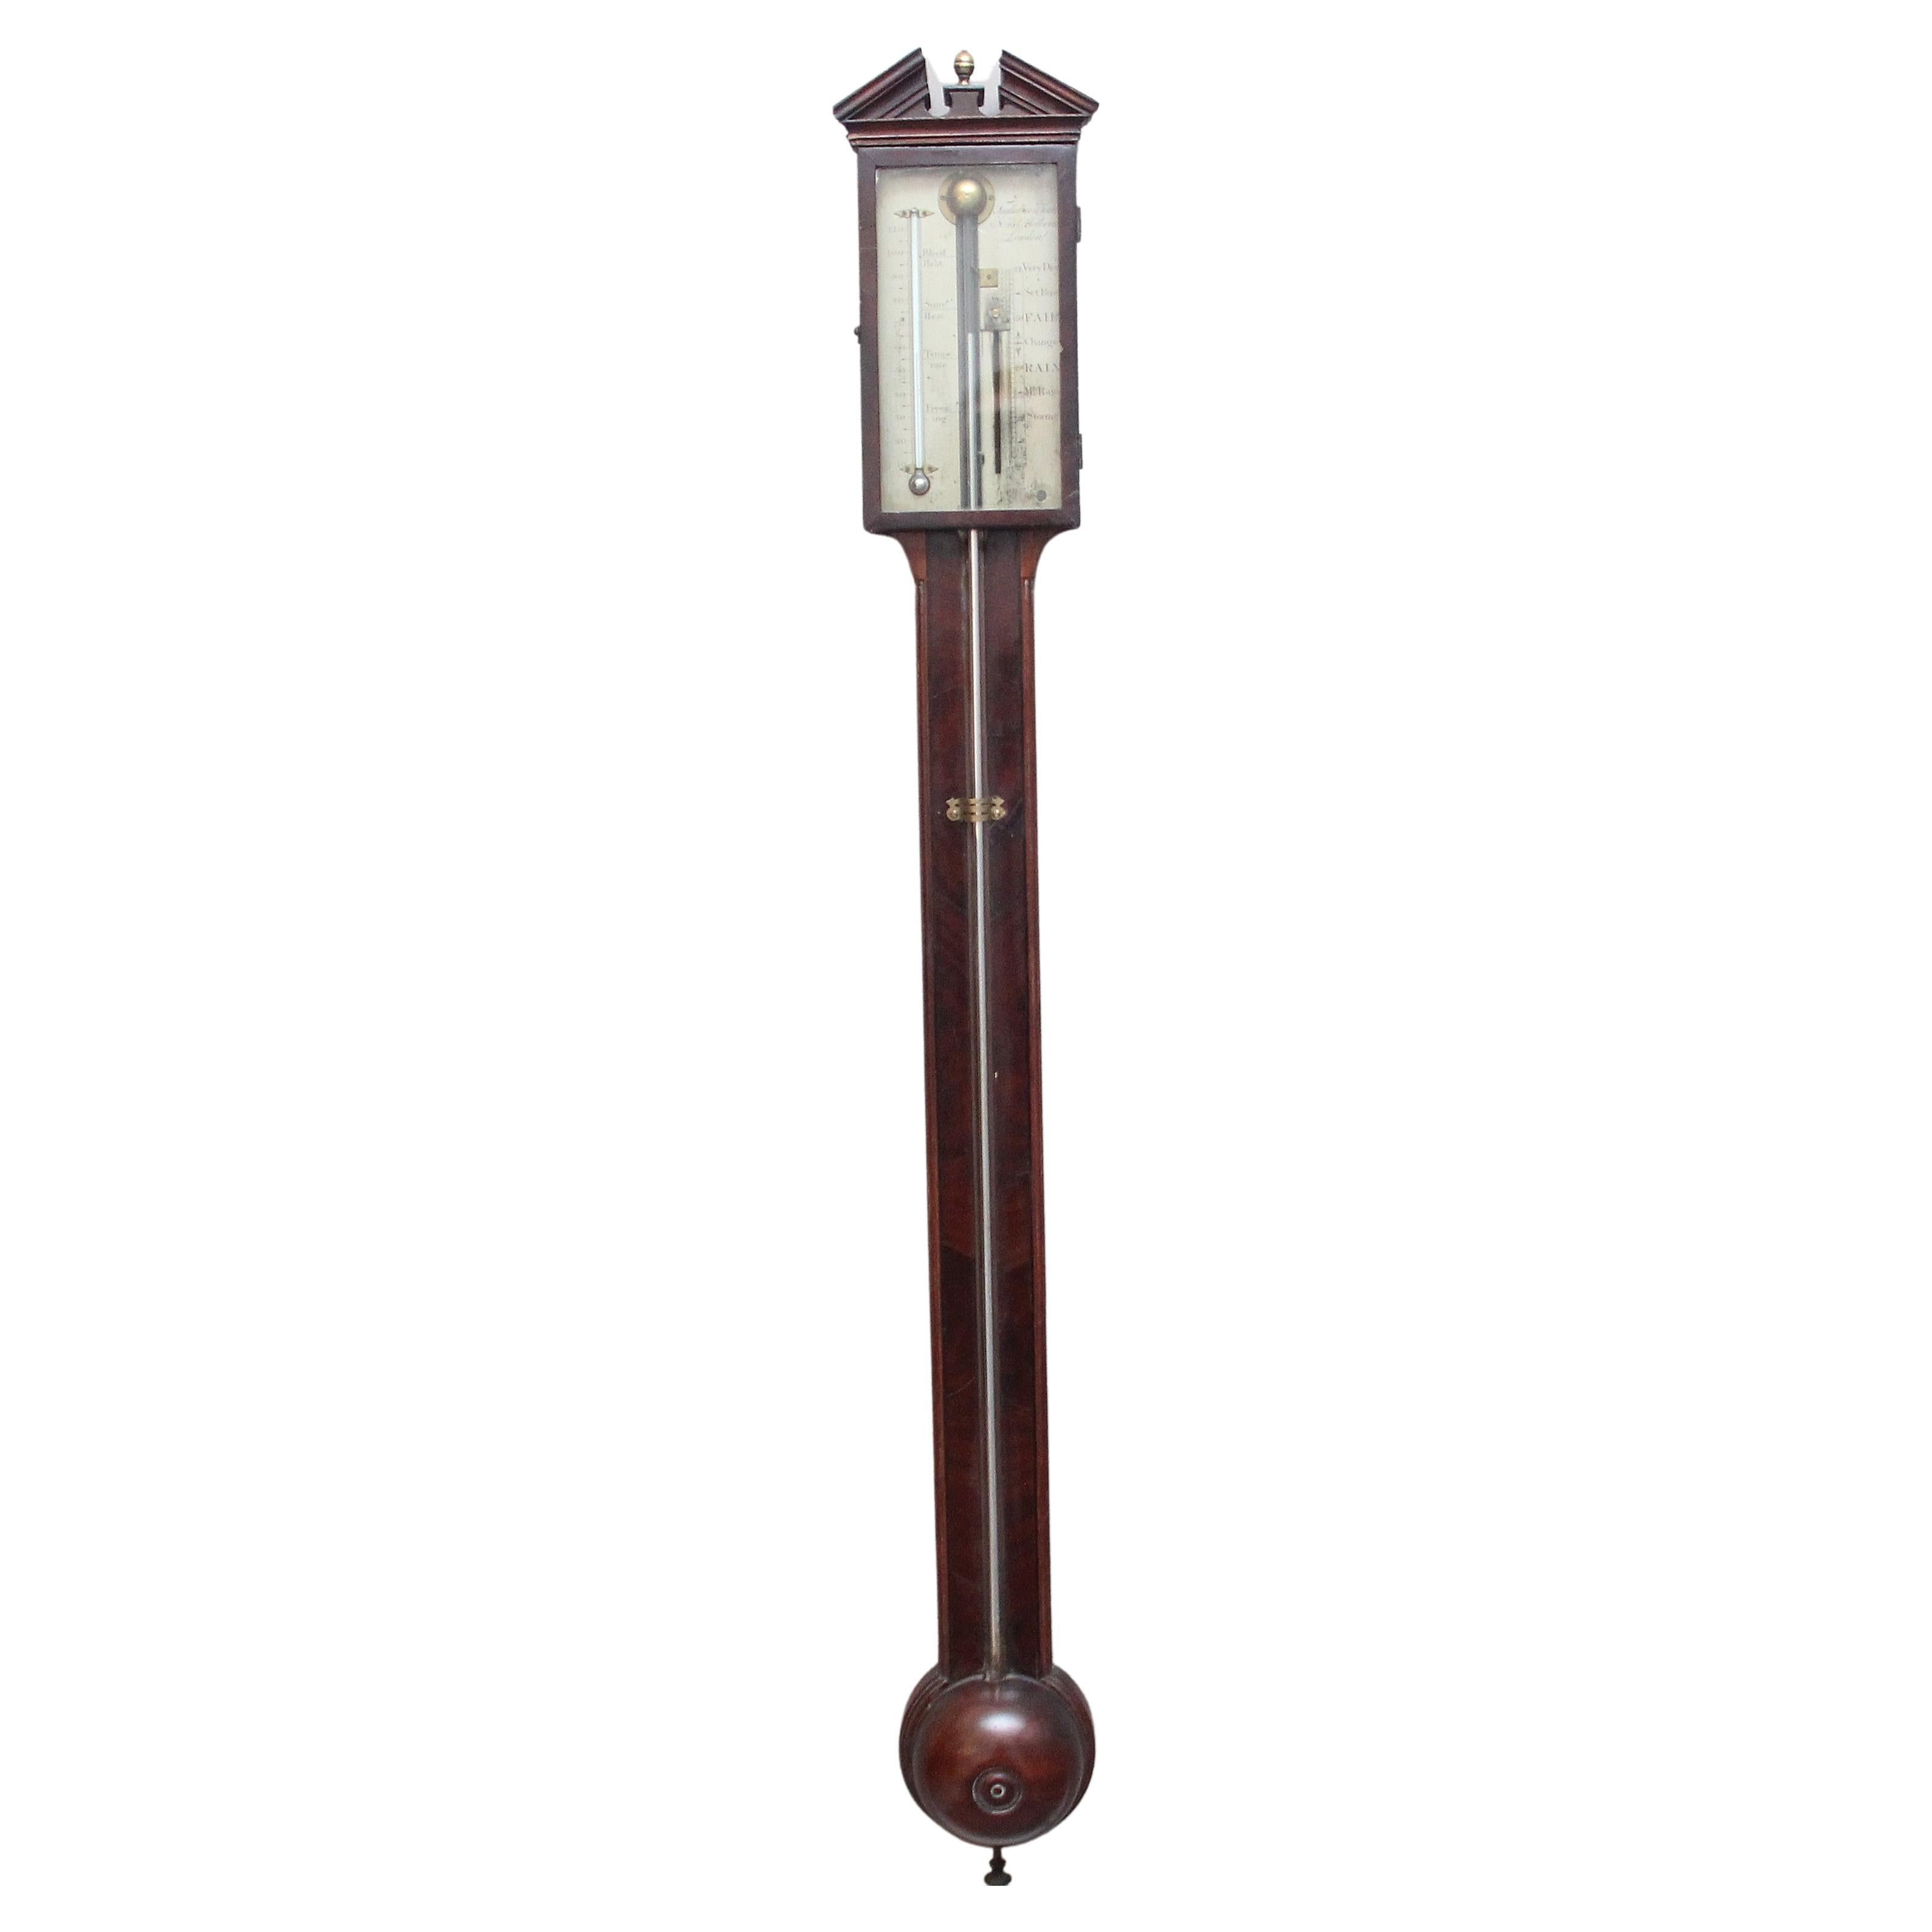 Early 19th Century Mahogany Stick Barometer by Tagliaue & Torre of 294 Holborn